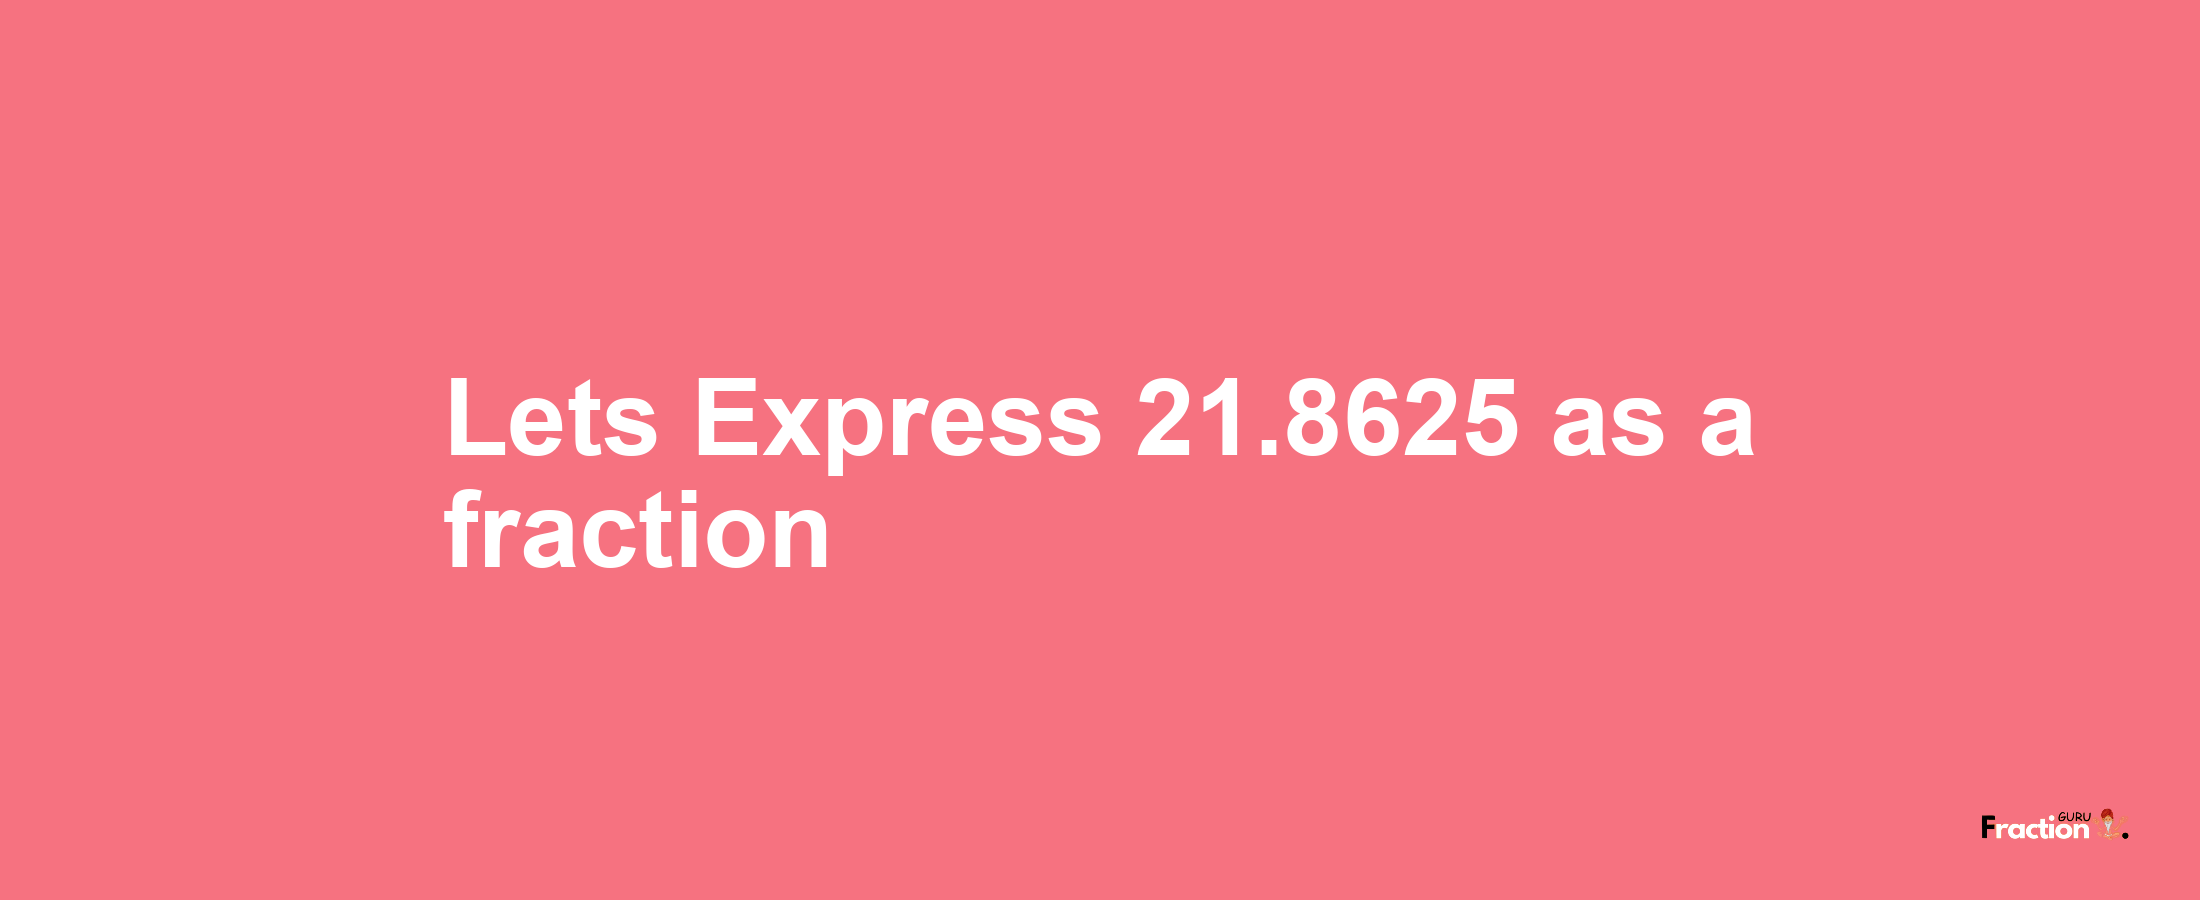 Lets Express 21.8625 as afraction